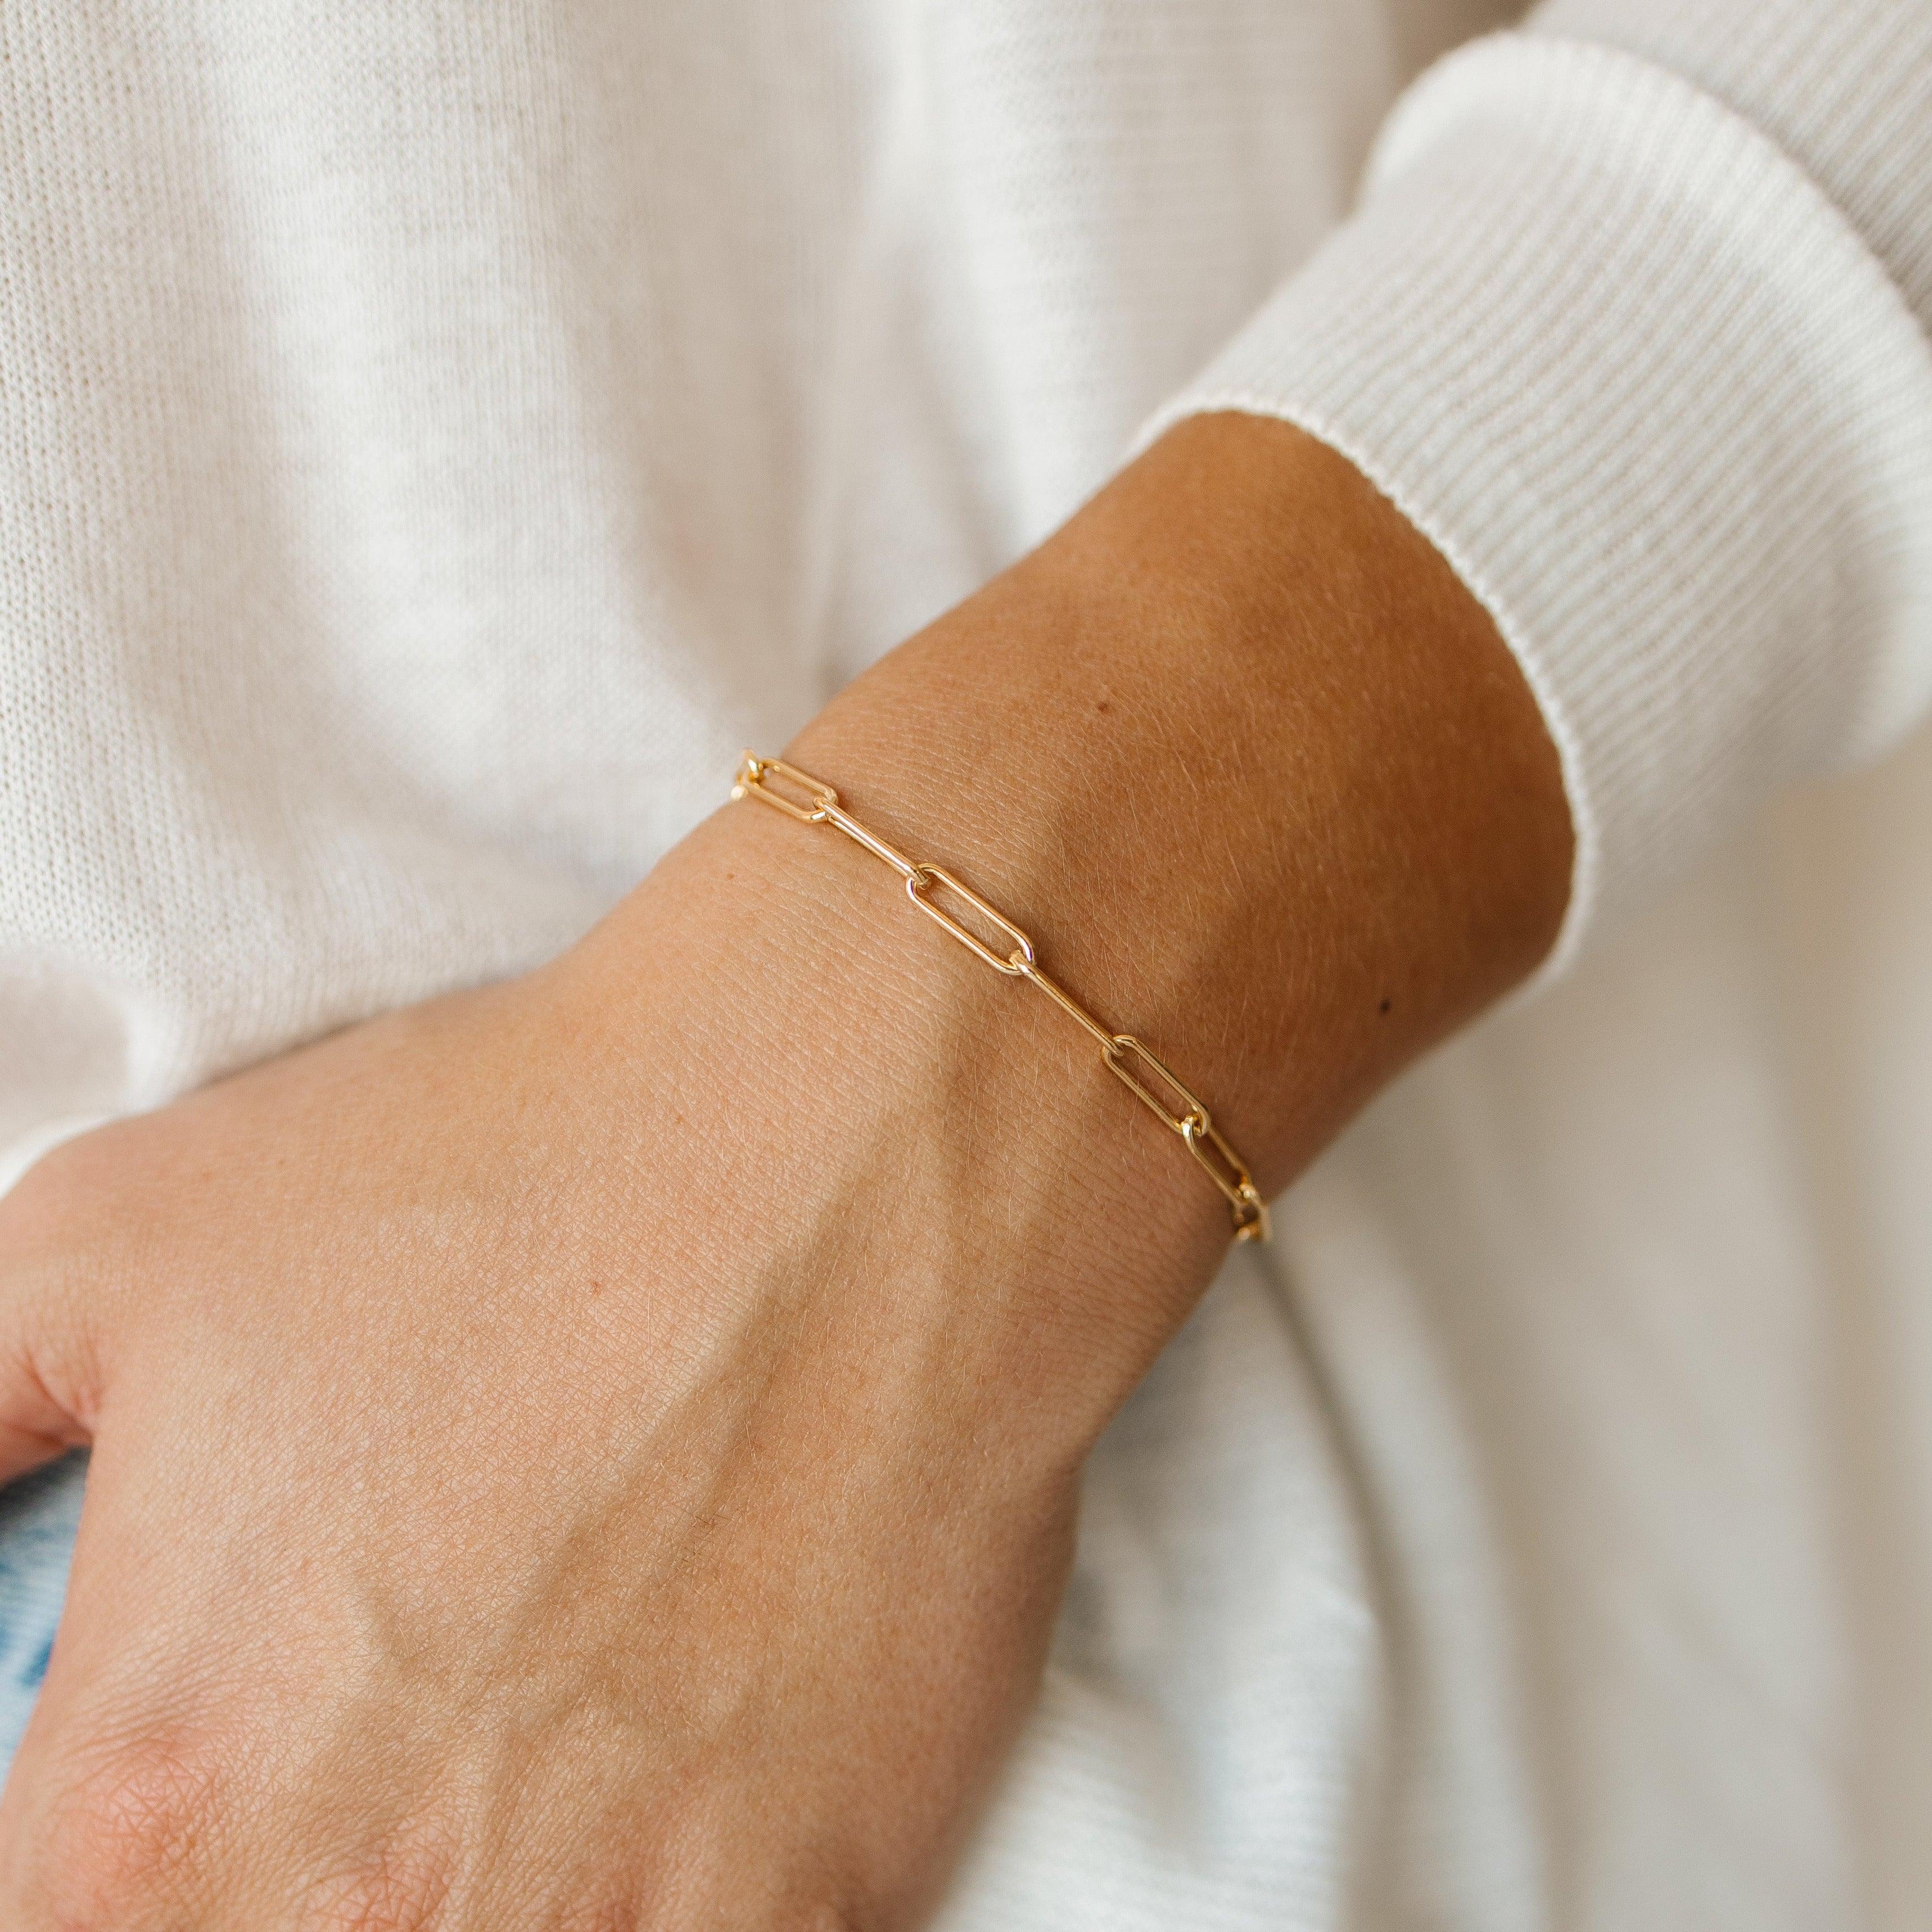 Bold Paperclip Bracelet - Nolia Jewelry - Meaningful + Sustainably Handcrafted Jewelry